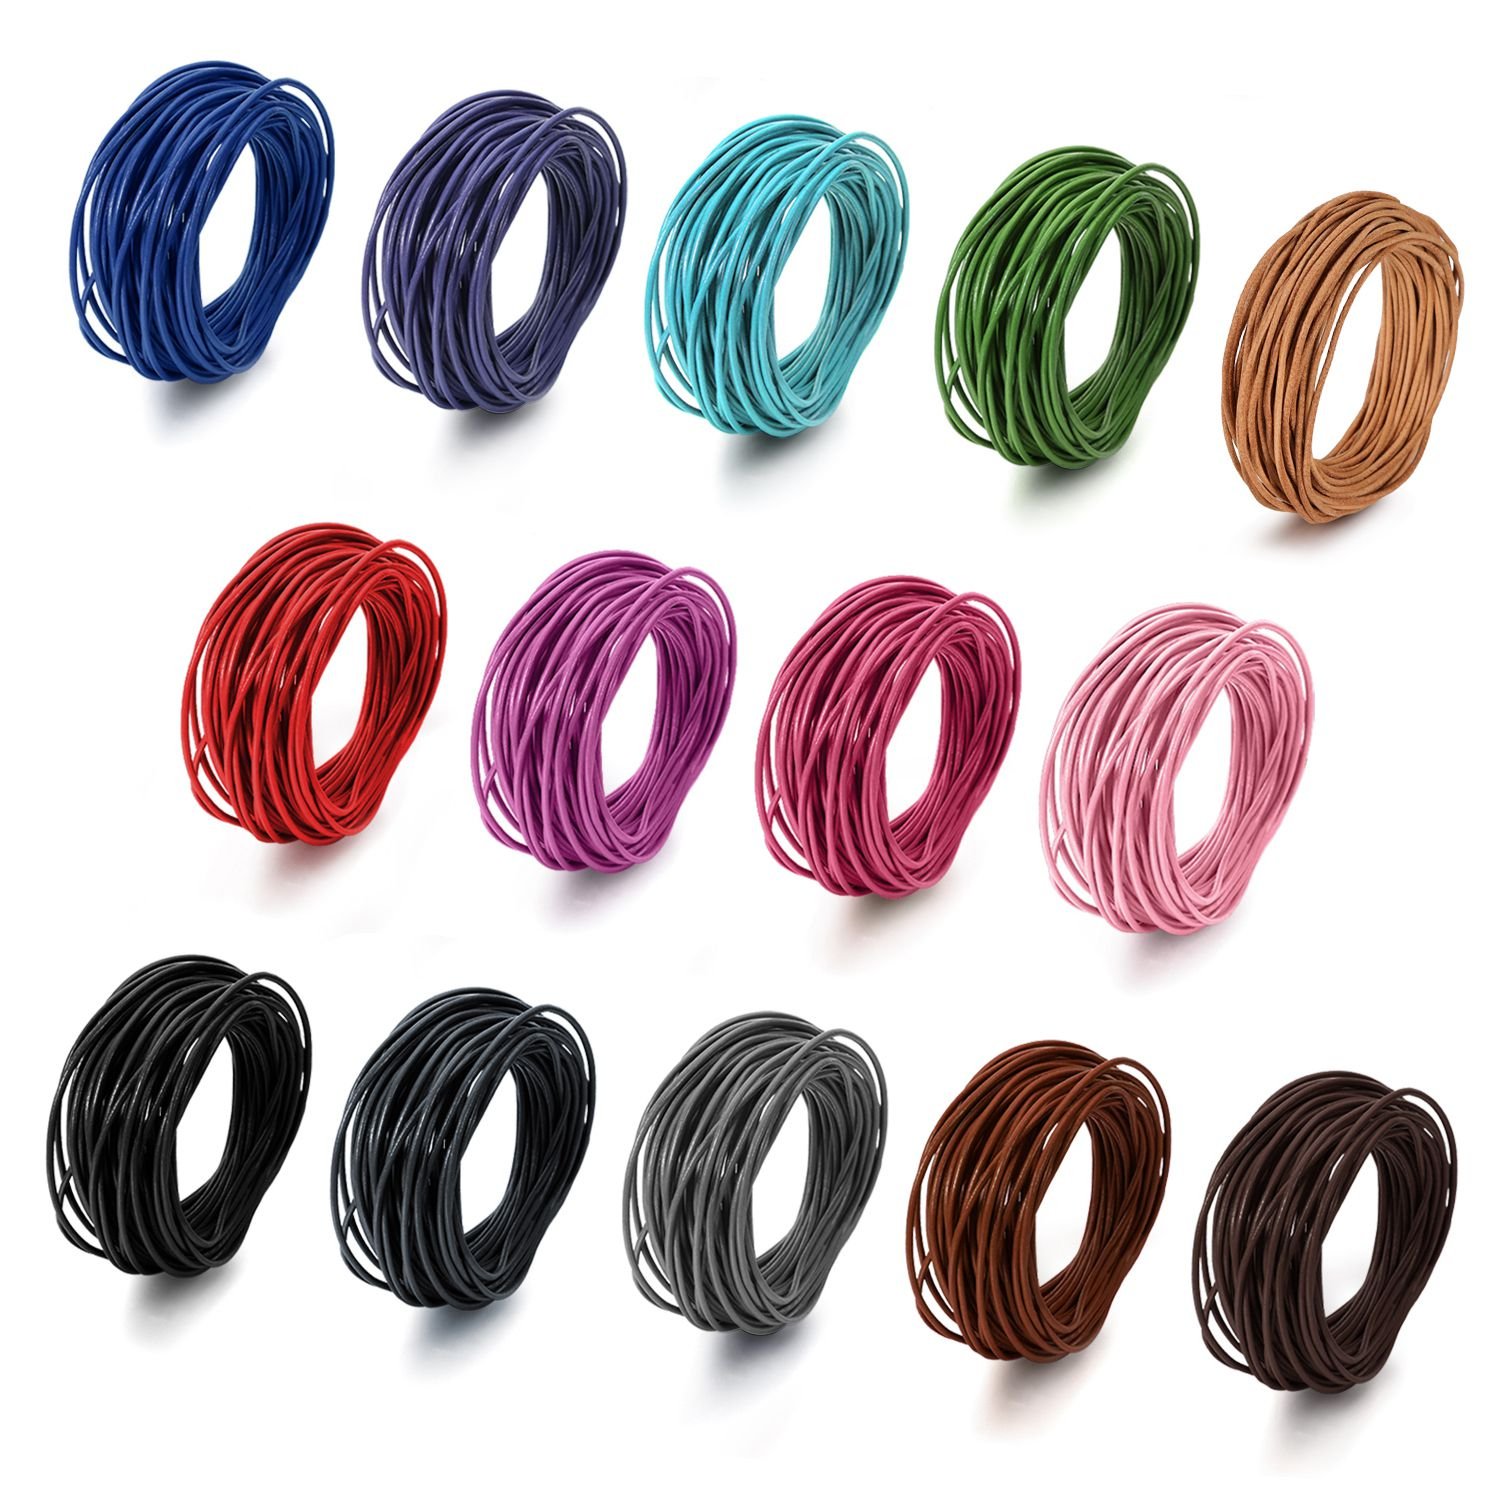 BEADNOVA Genuine Round Leather Cord Black Leather Strips for Jewelry Making Bracelet Necklace ...